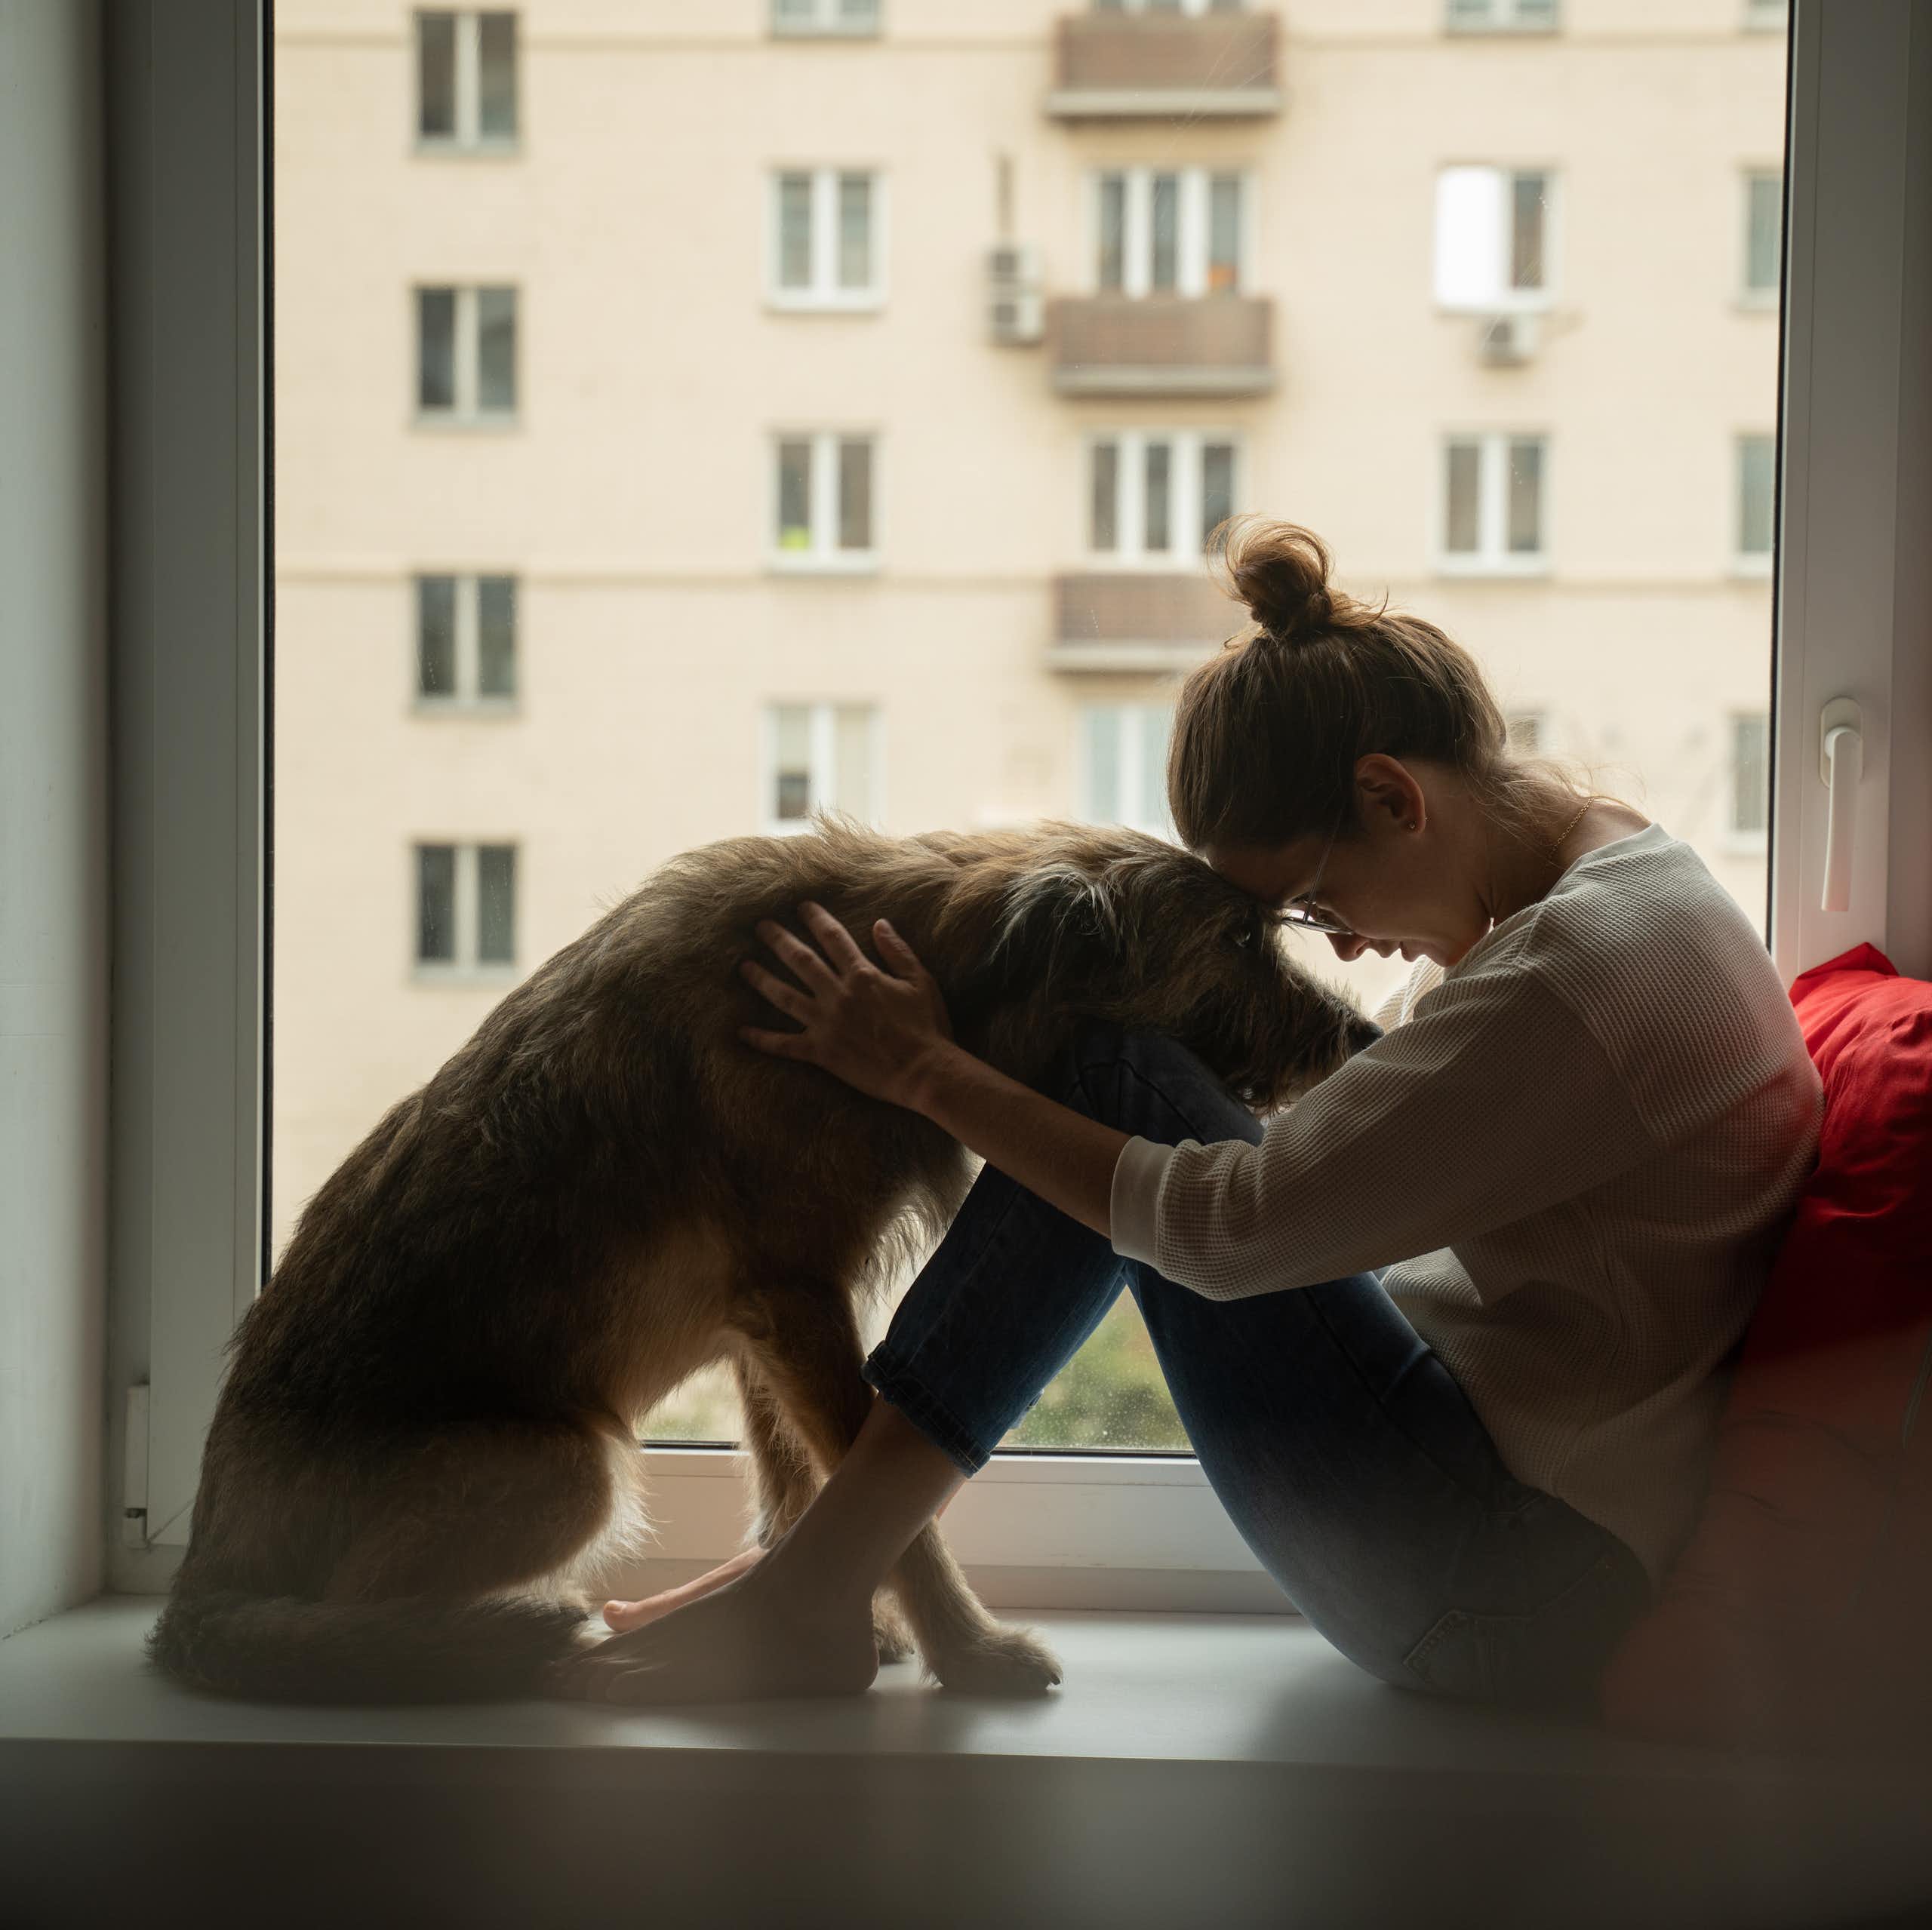 A woman and dog sitting in a dar room next to a window